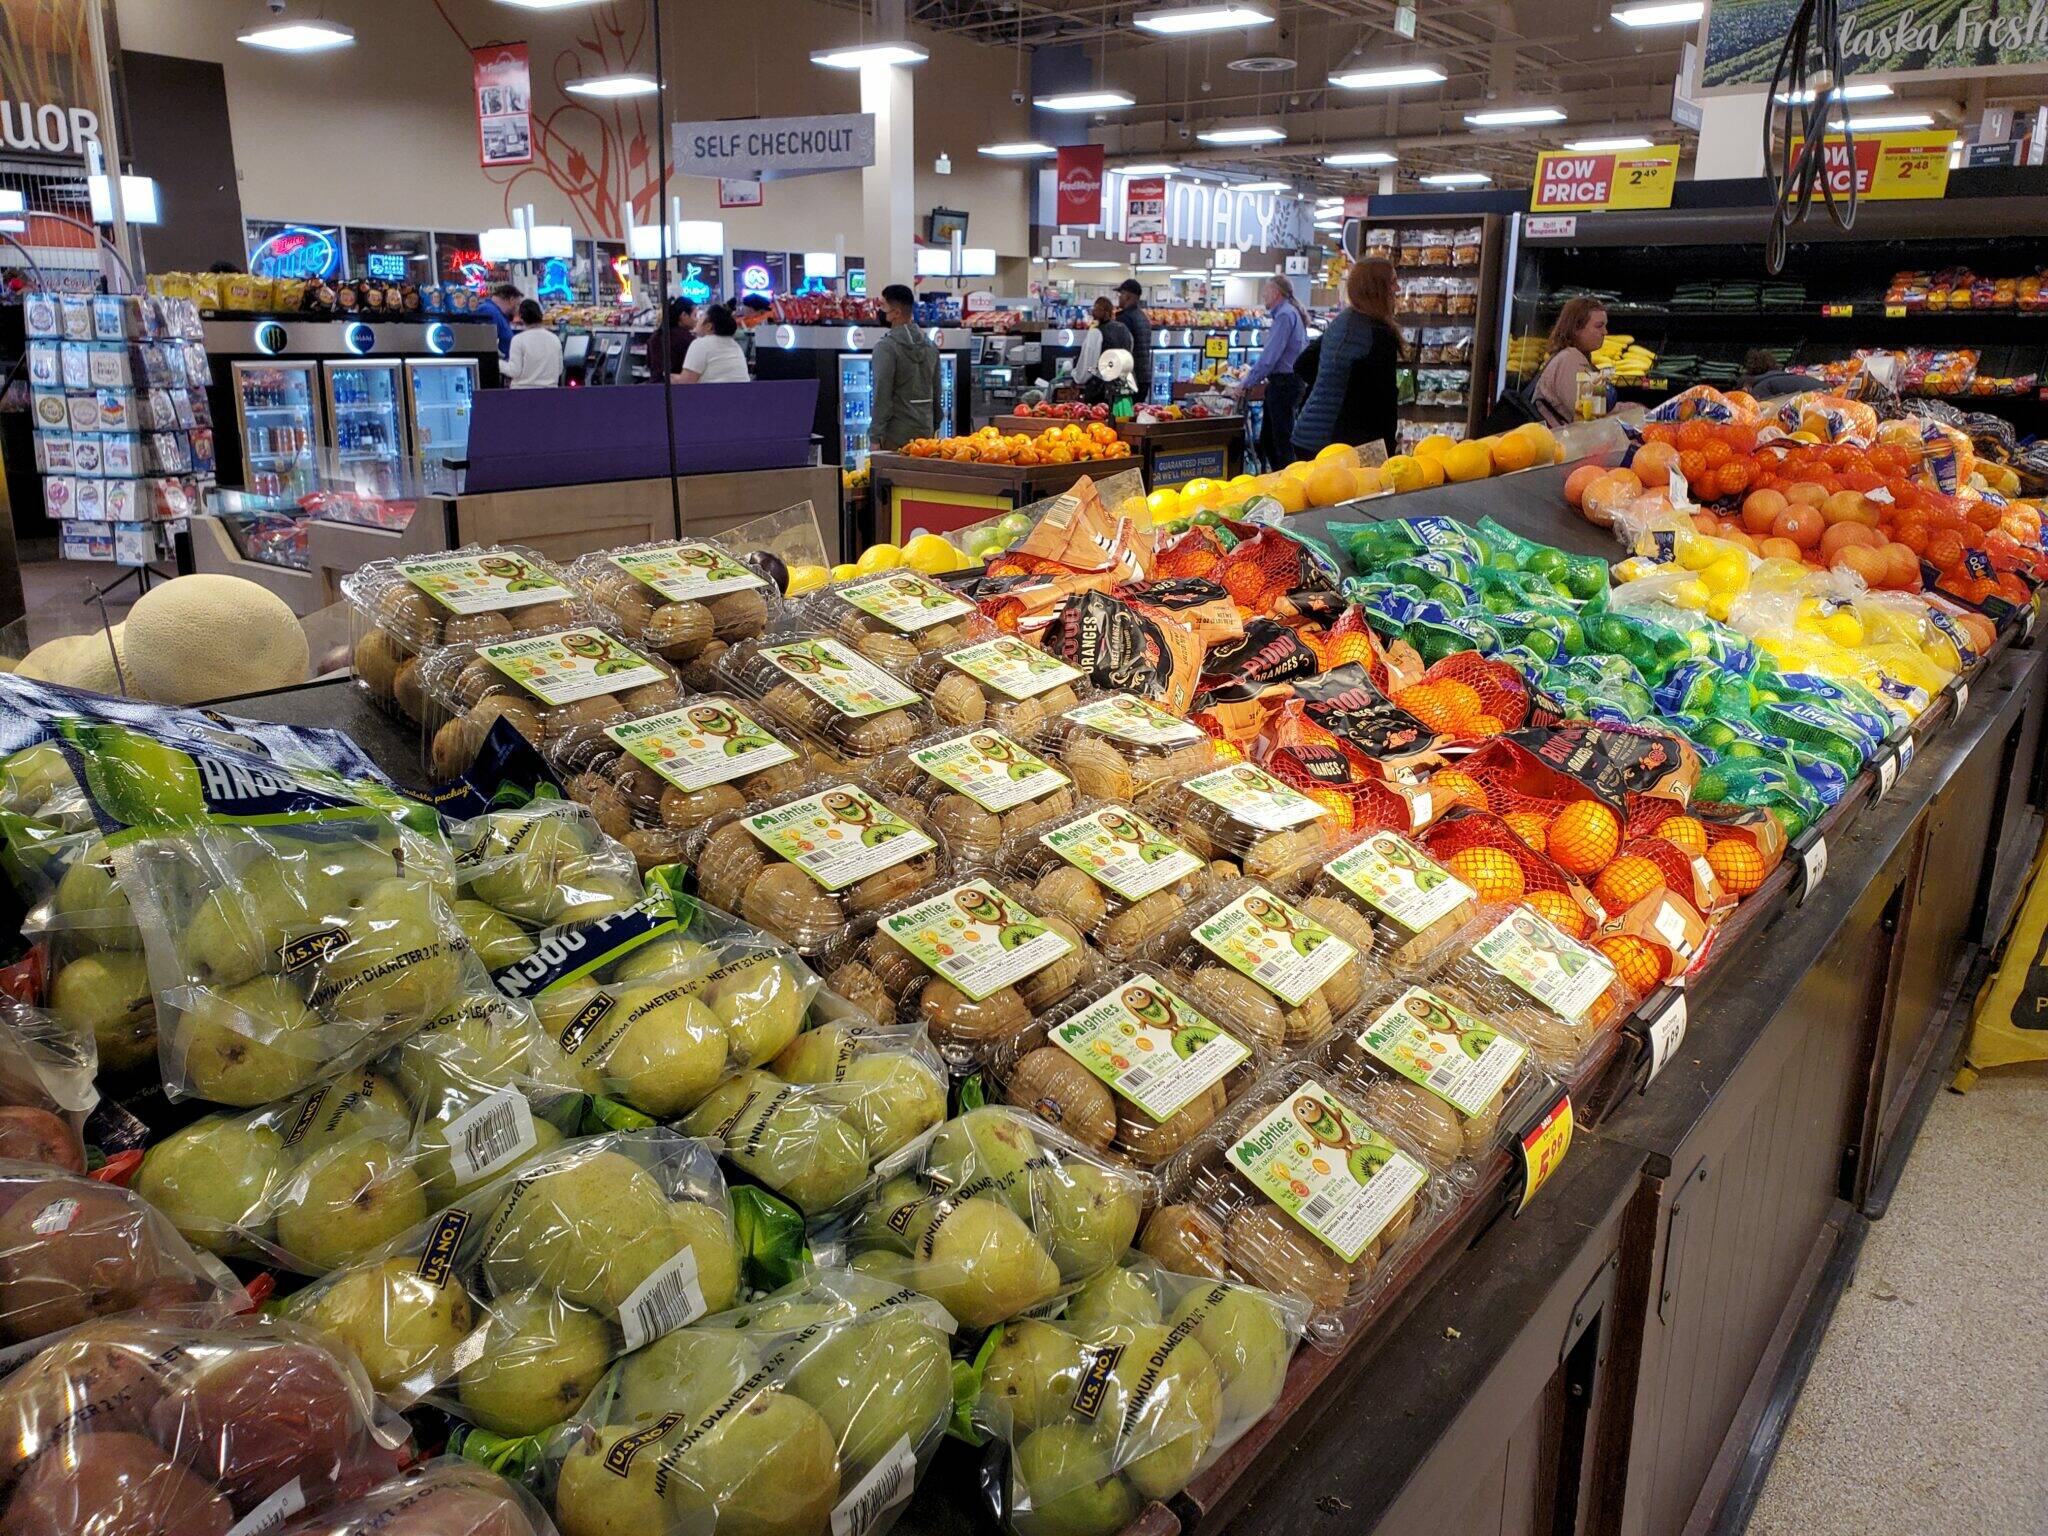 Fruit is displayed at an Anchorage grocery store. (Photo by Yereth Rosen/Alaska Beacon)